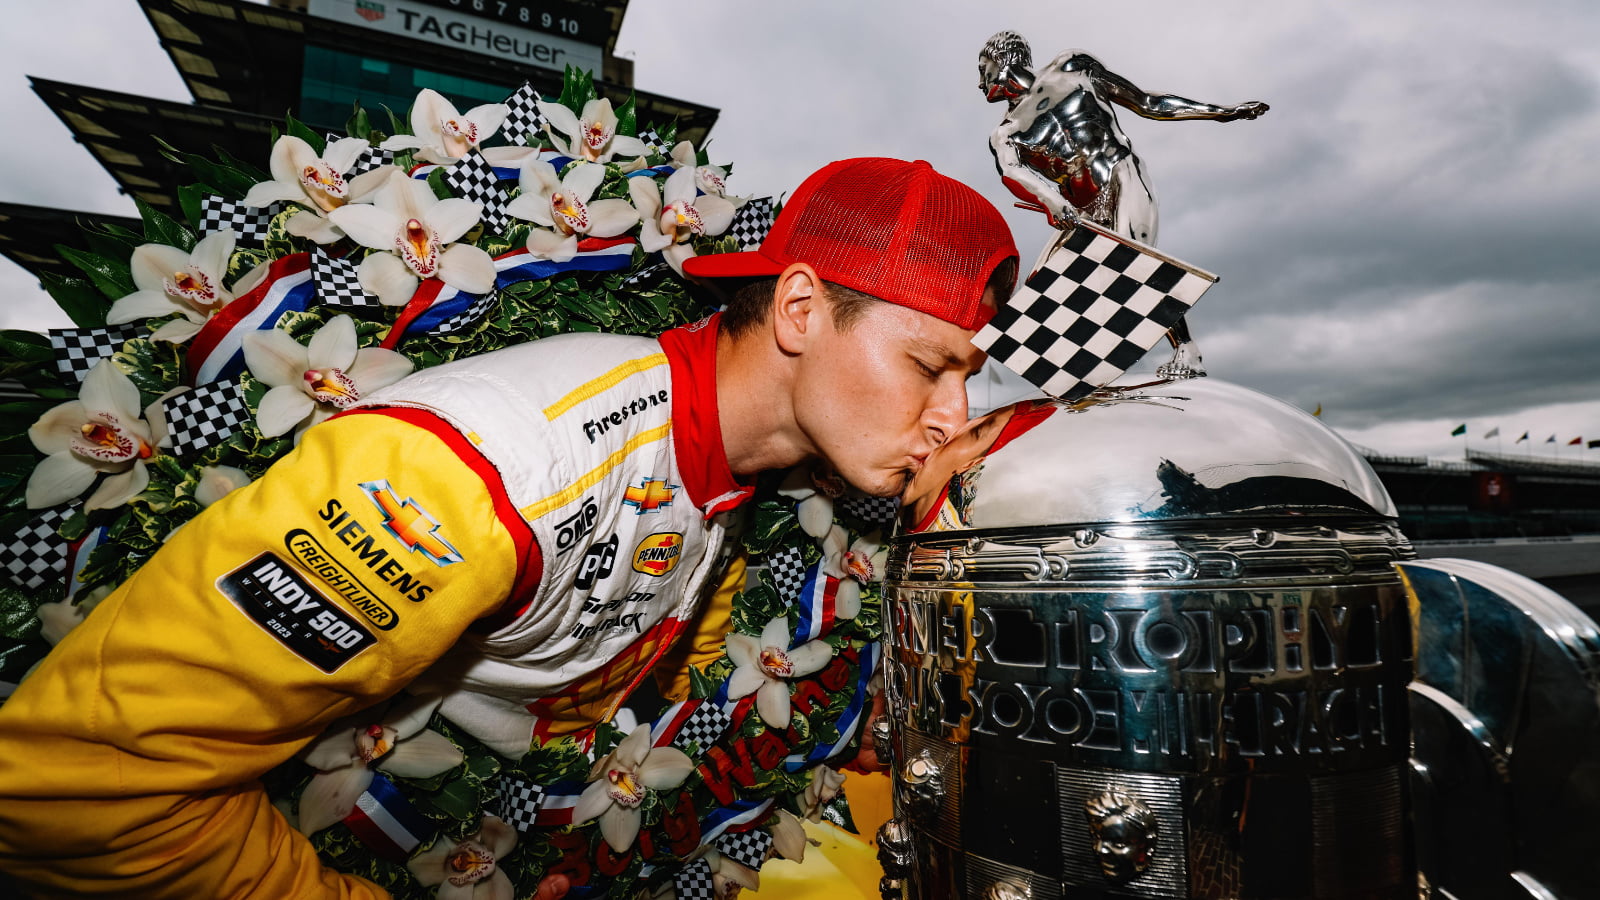 Newgarden earns record $4.28 million payday for Indy 500 win